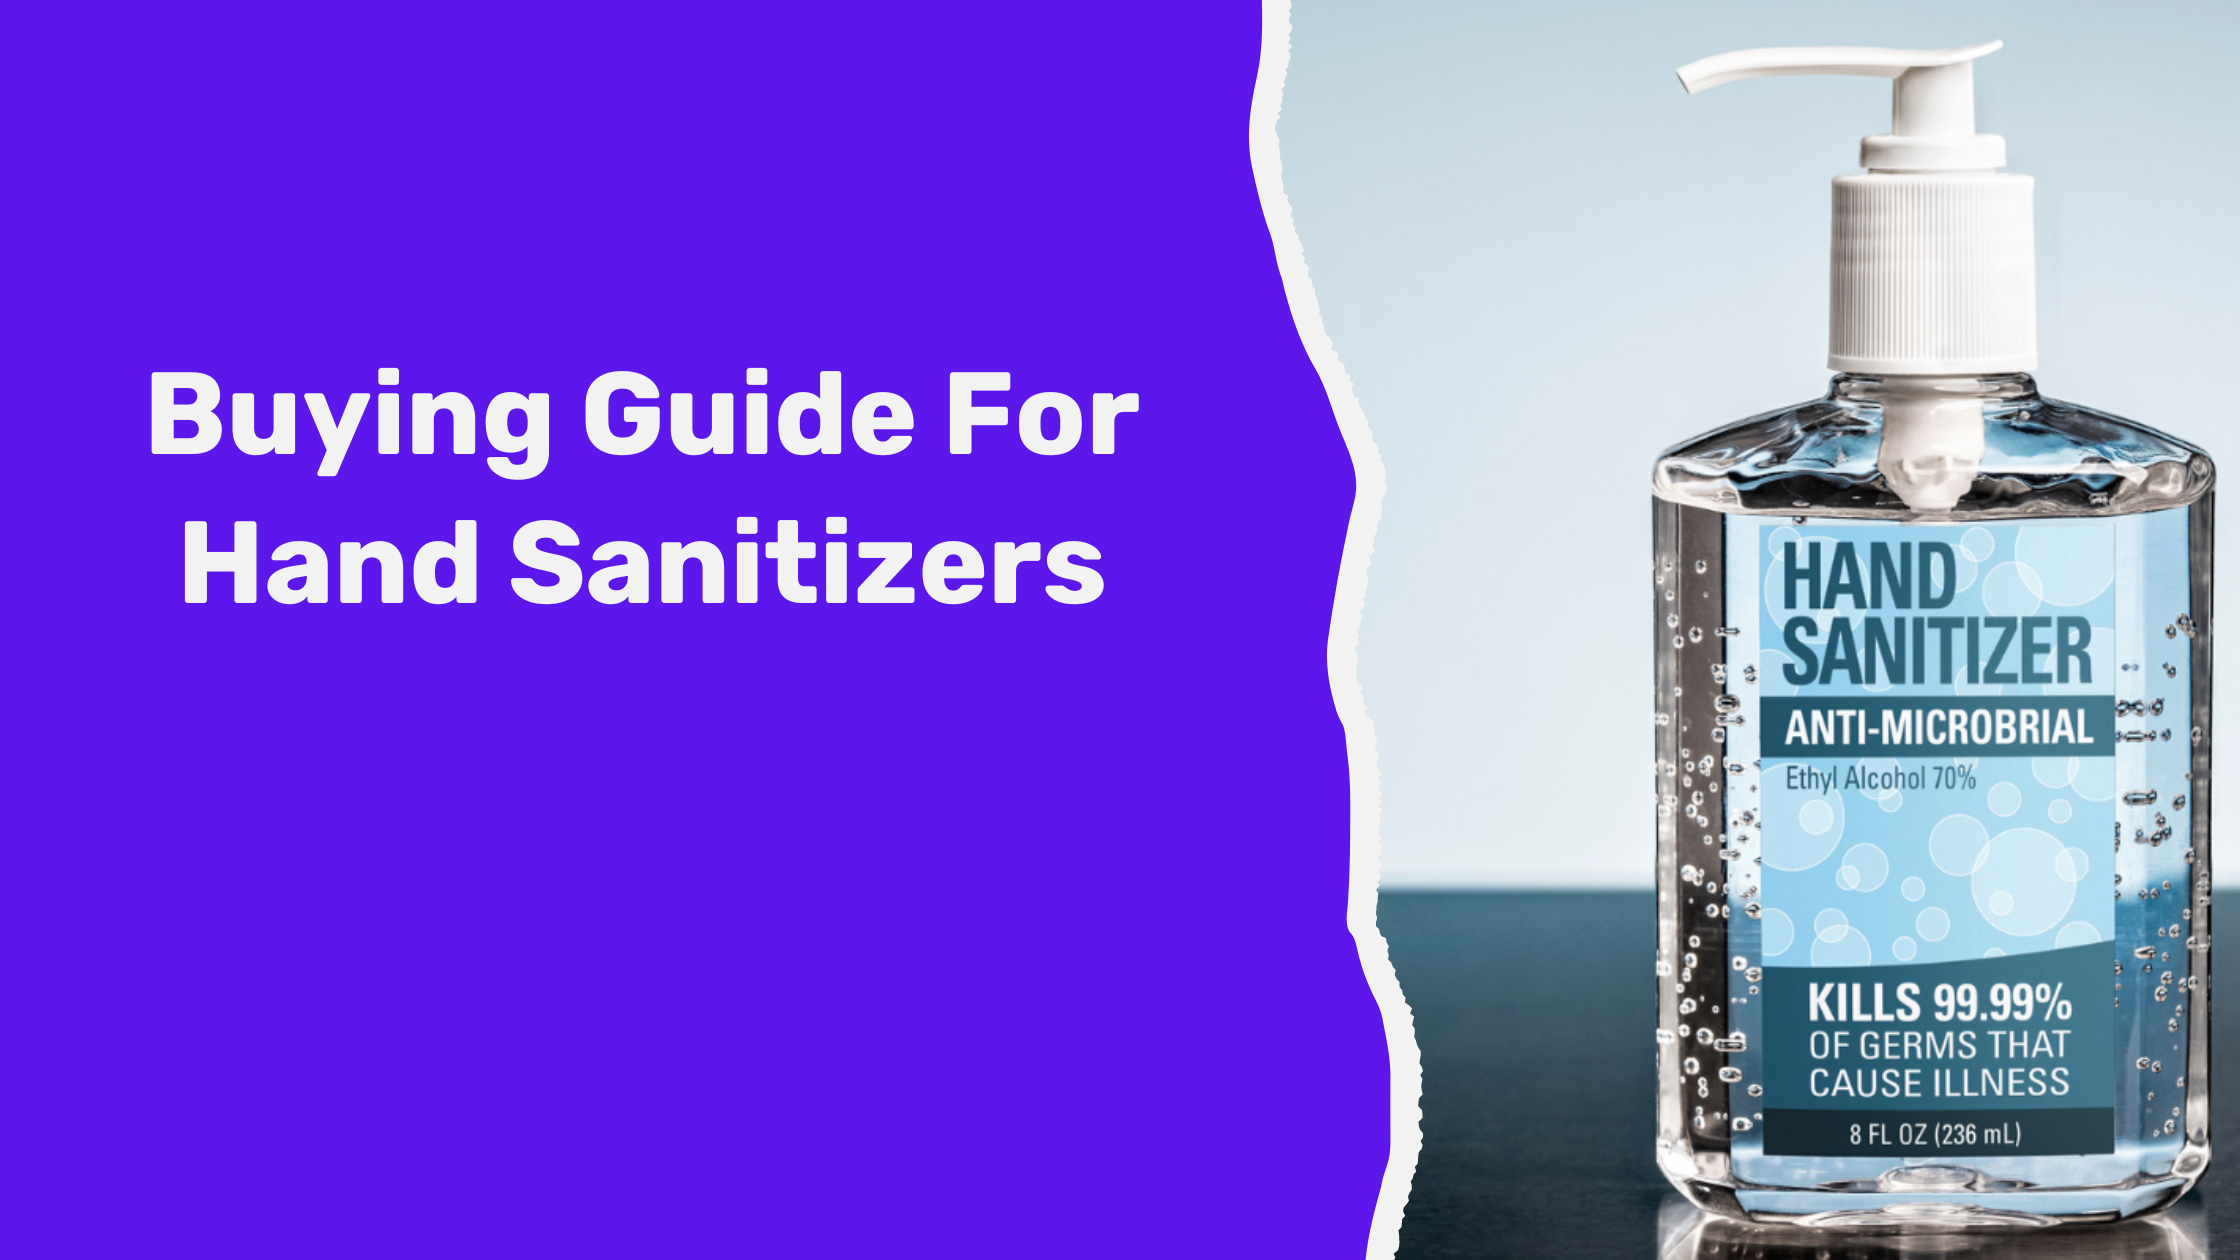 Complete Buying Guide for Hand Sanitizers: Price, Effectiveness, and More